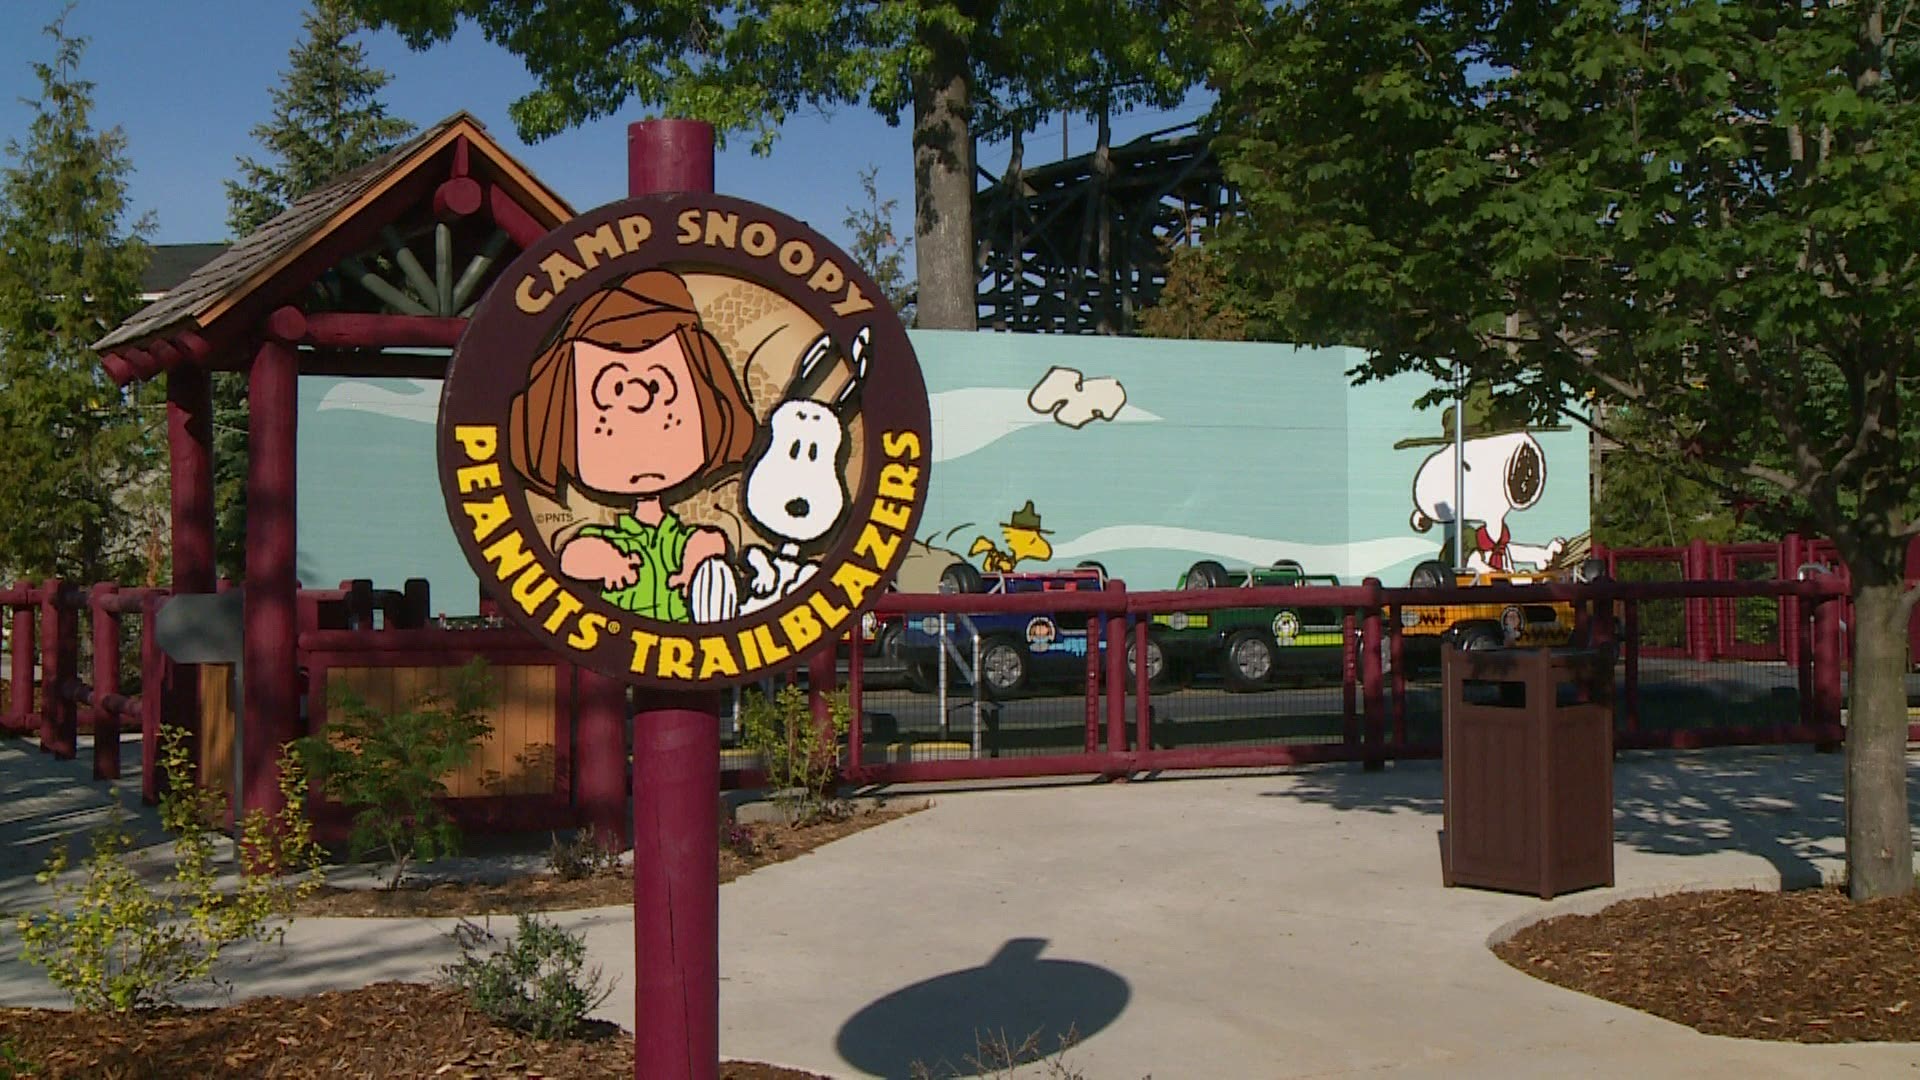 The opening of Camp Snoopy was delayed by one year because of the pandemic but now the amusement park is ready to welcome back guests.